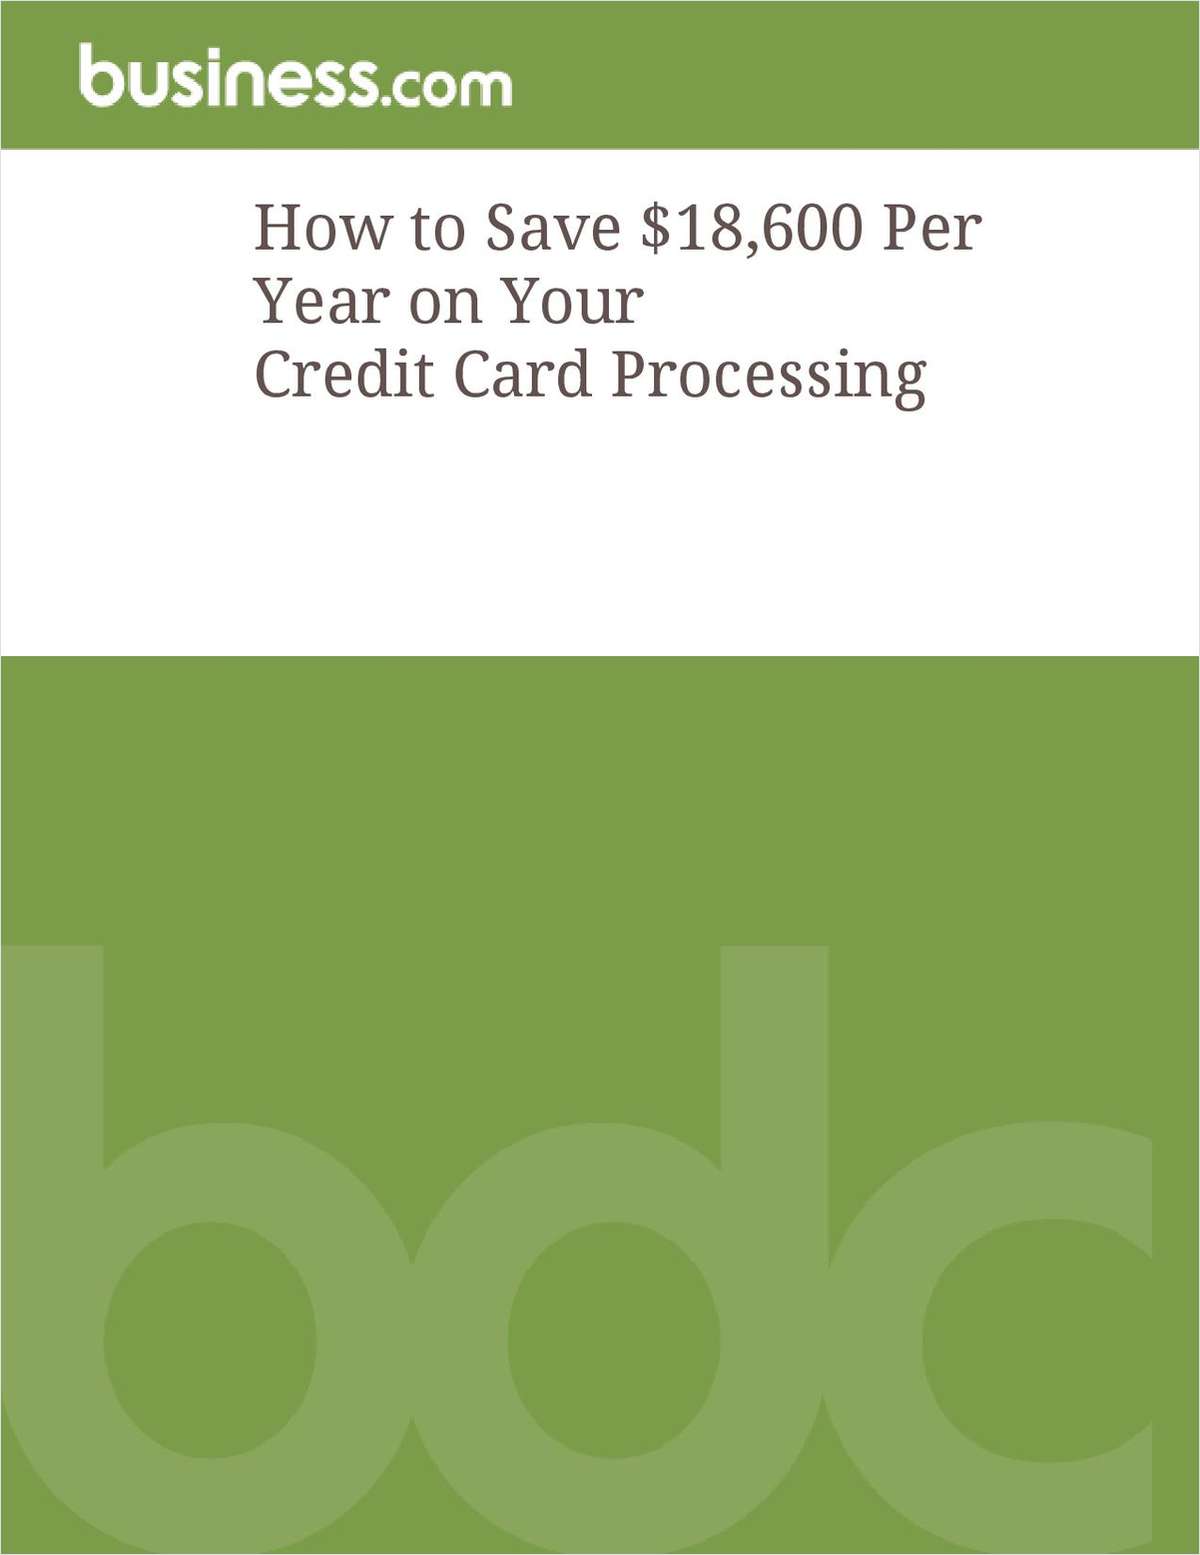 Credit Card Processing: Justifying Merchant Service Fees